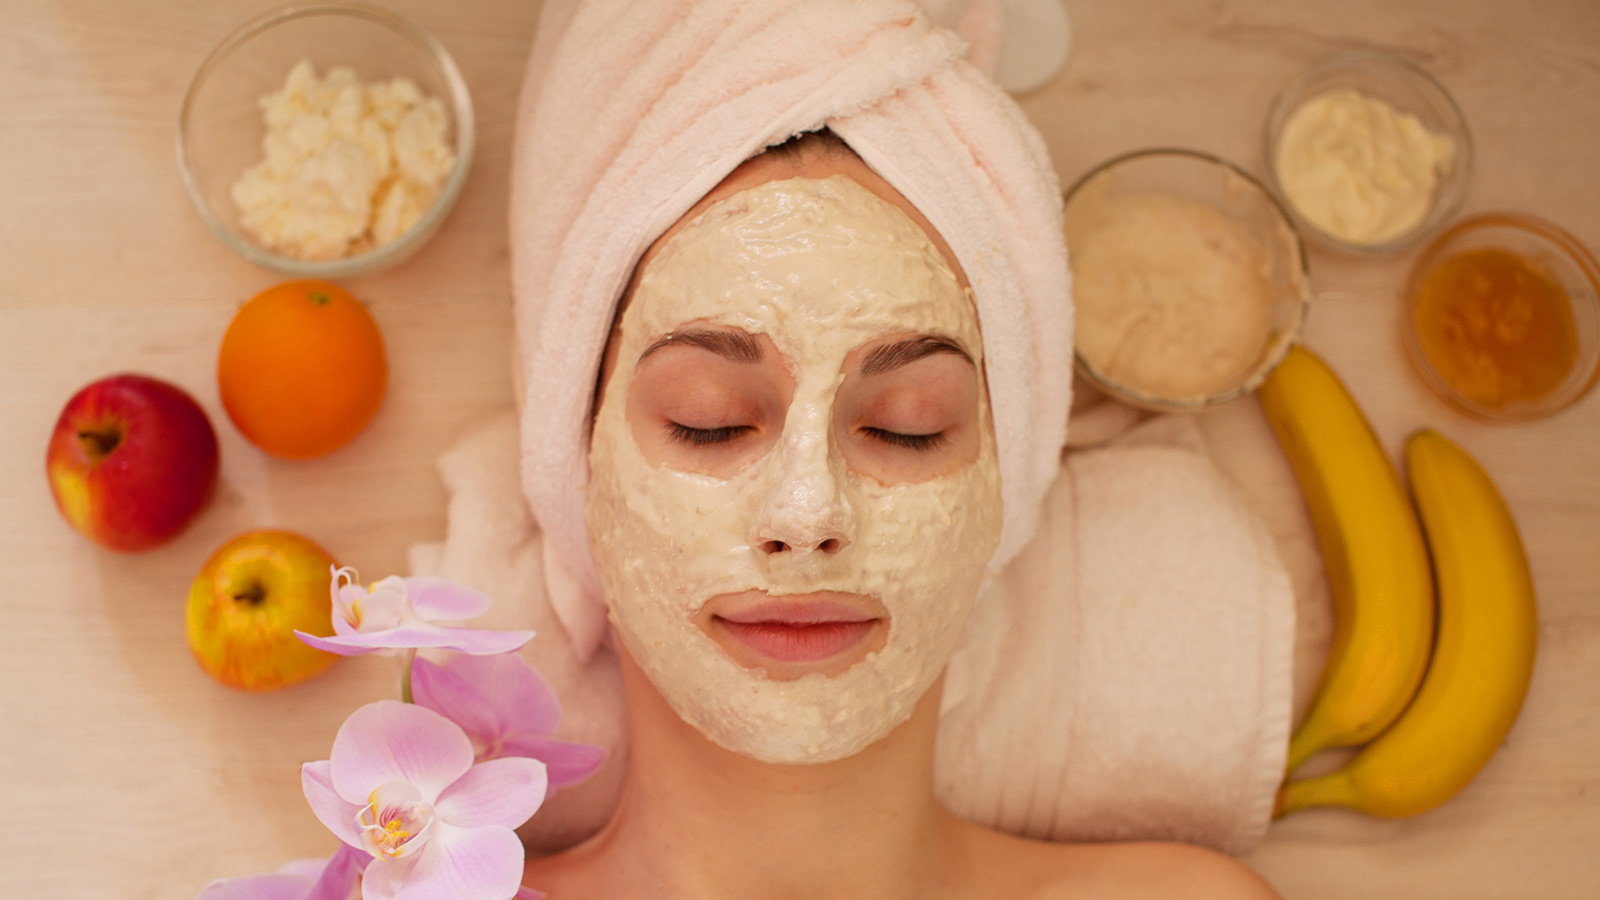 Tips For Glowing Skin: 6 Home Remedies That Actually Work